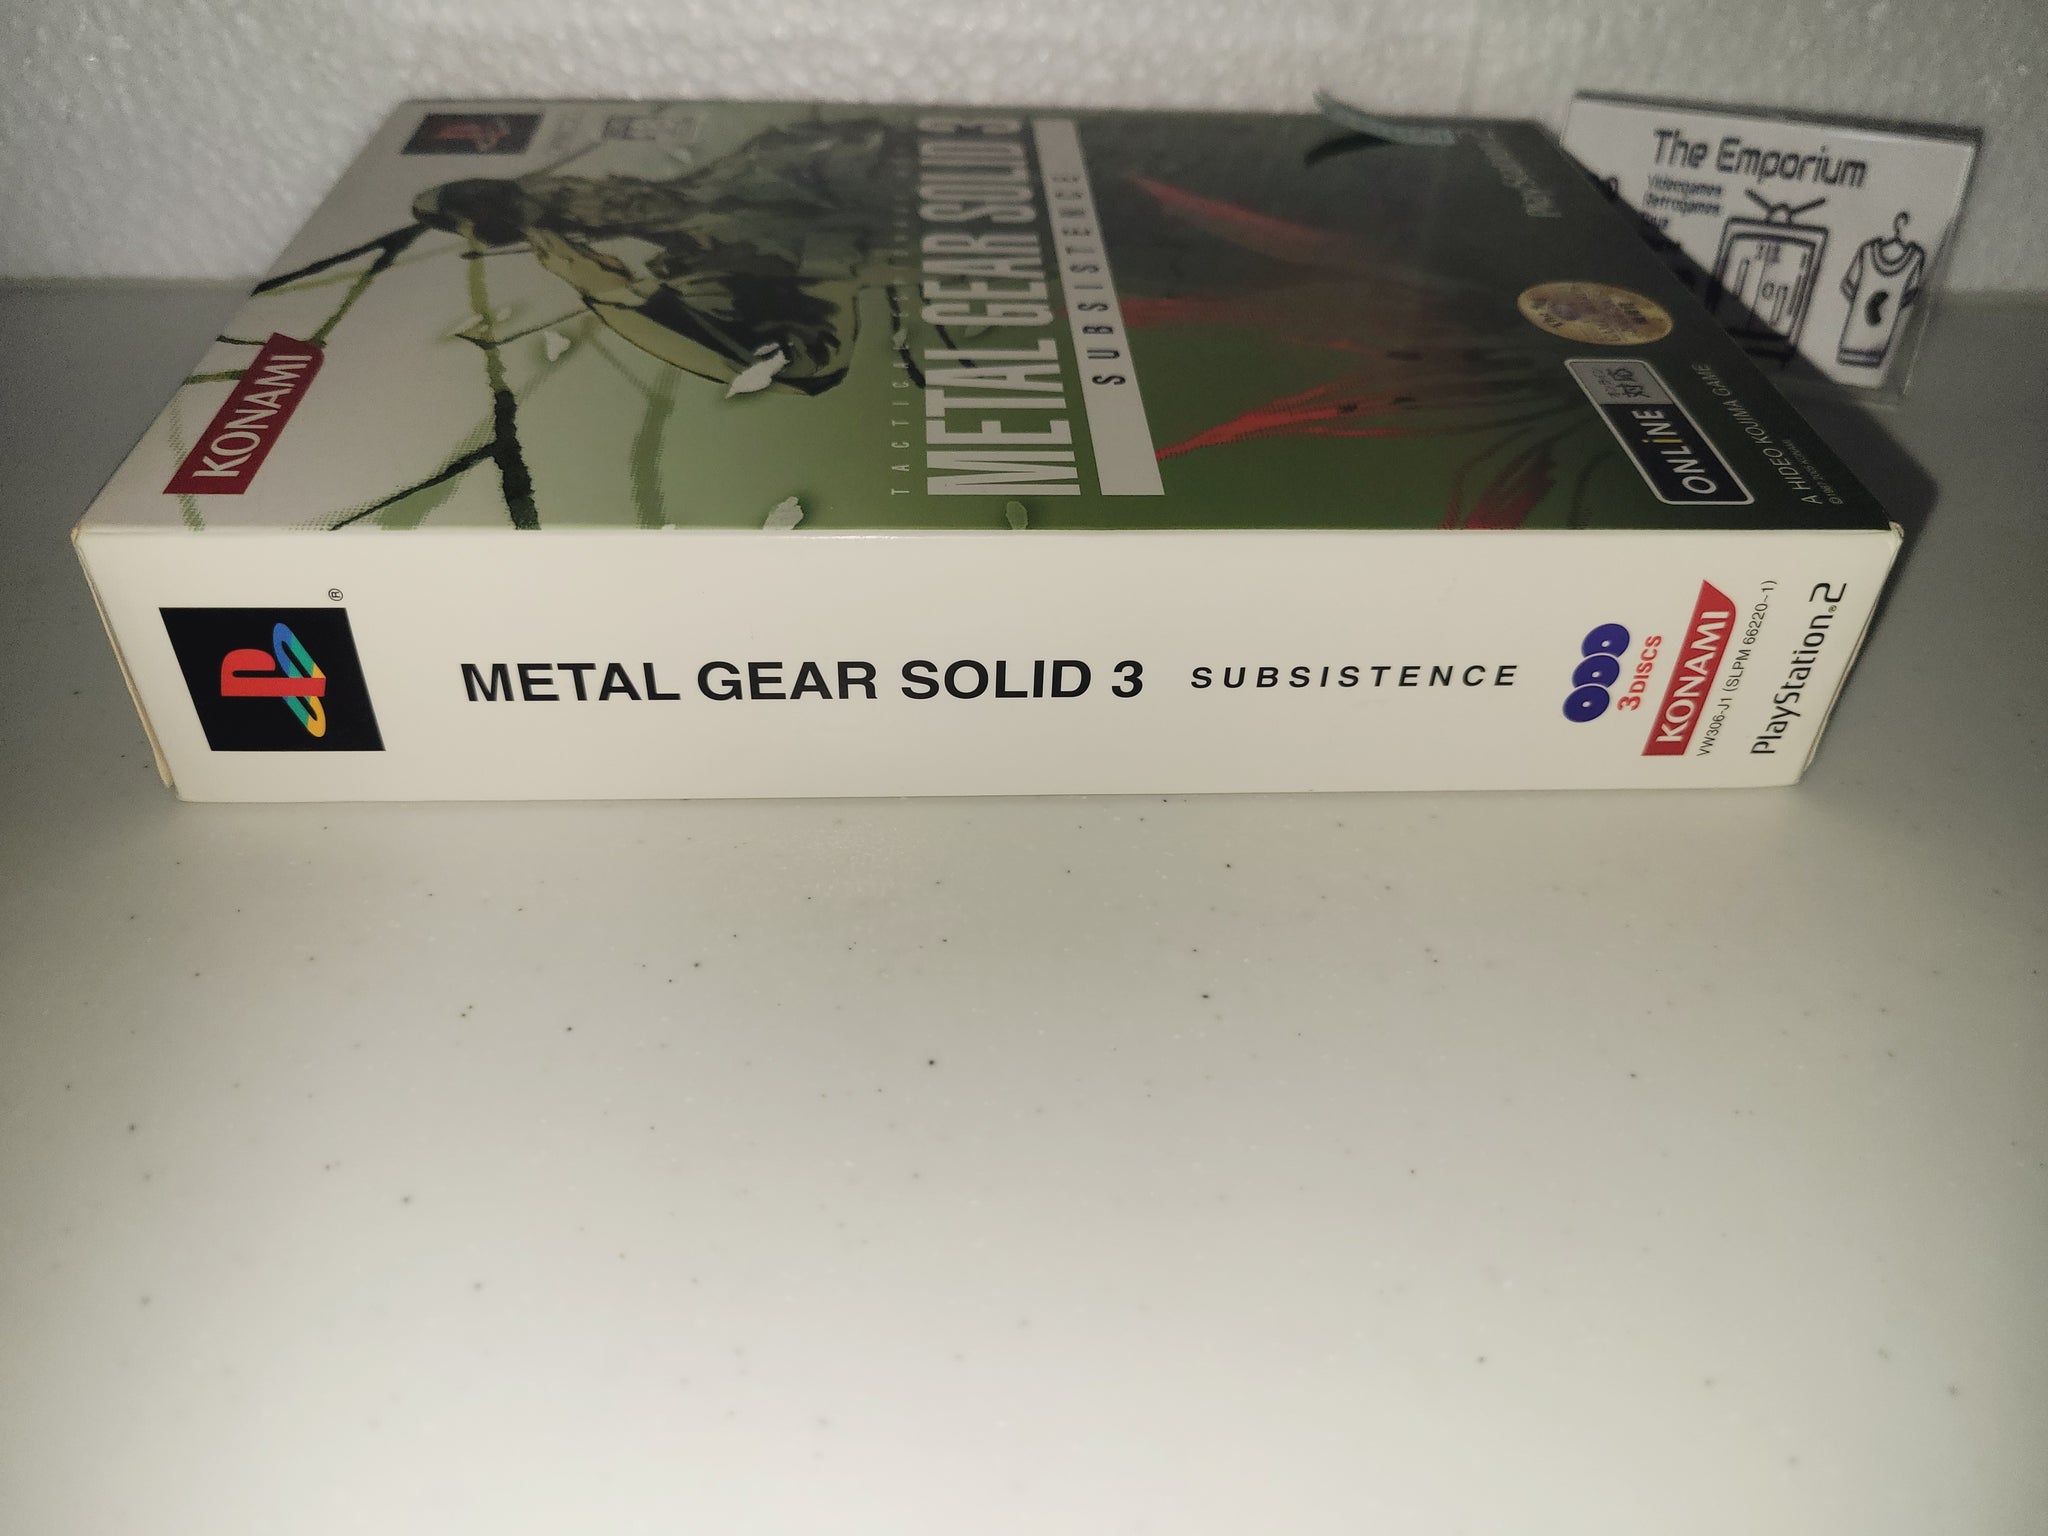 Metal Gear Solid 3 Subsistence [First Print Limited Edition] - Sony  playstation 2